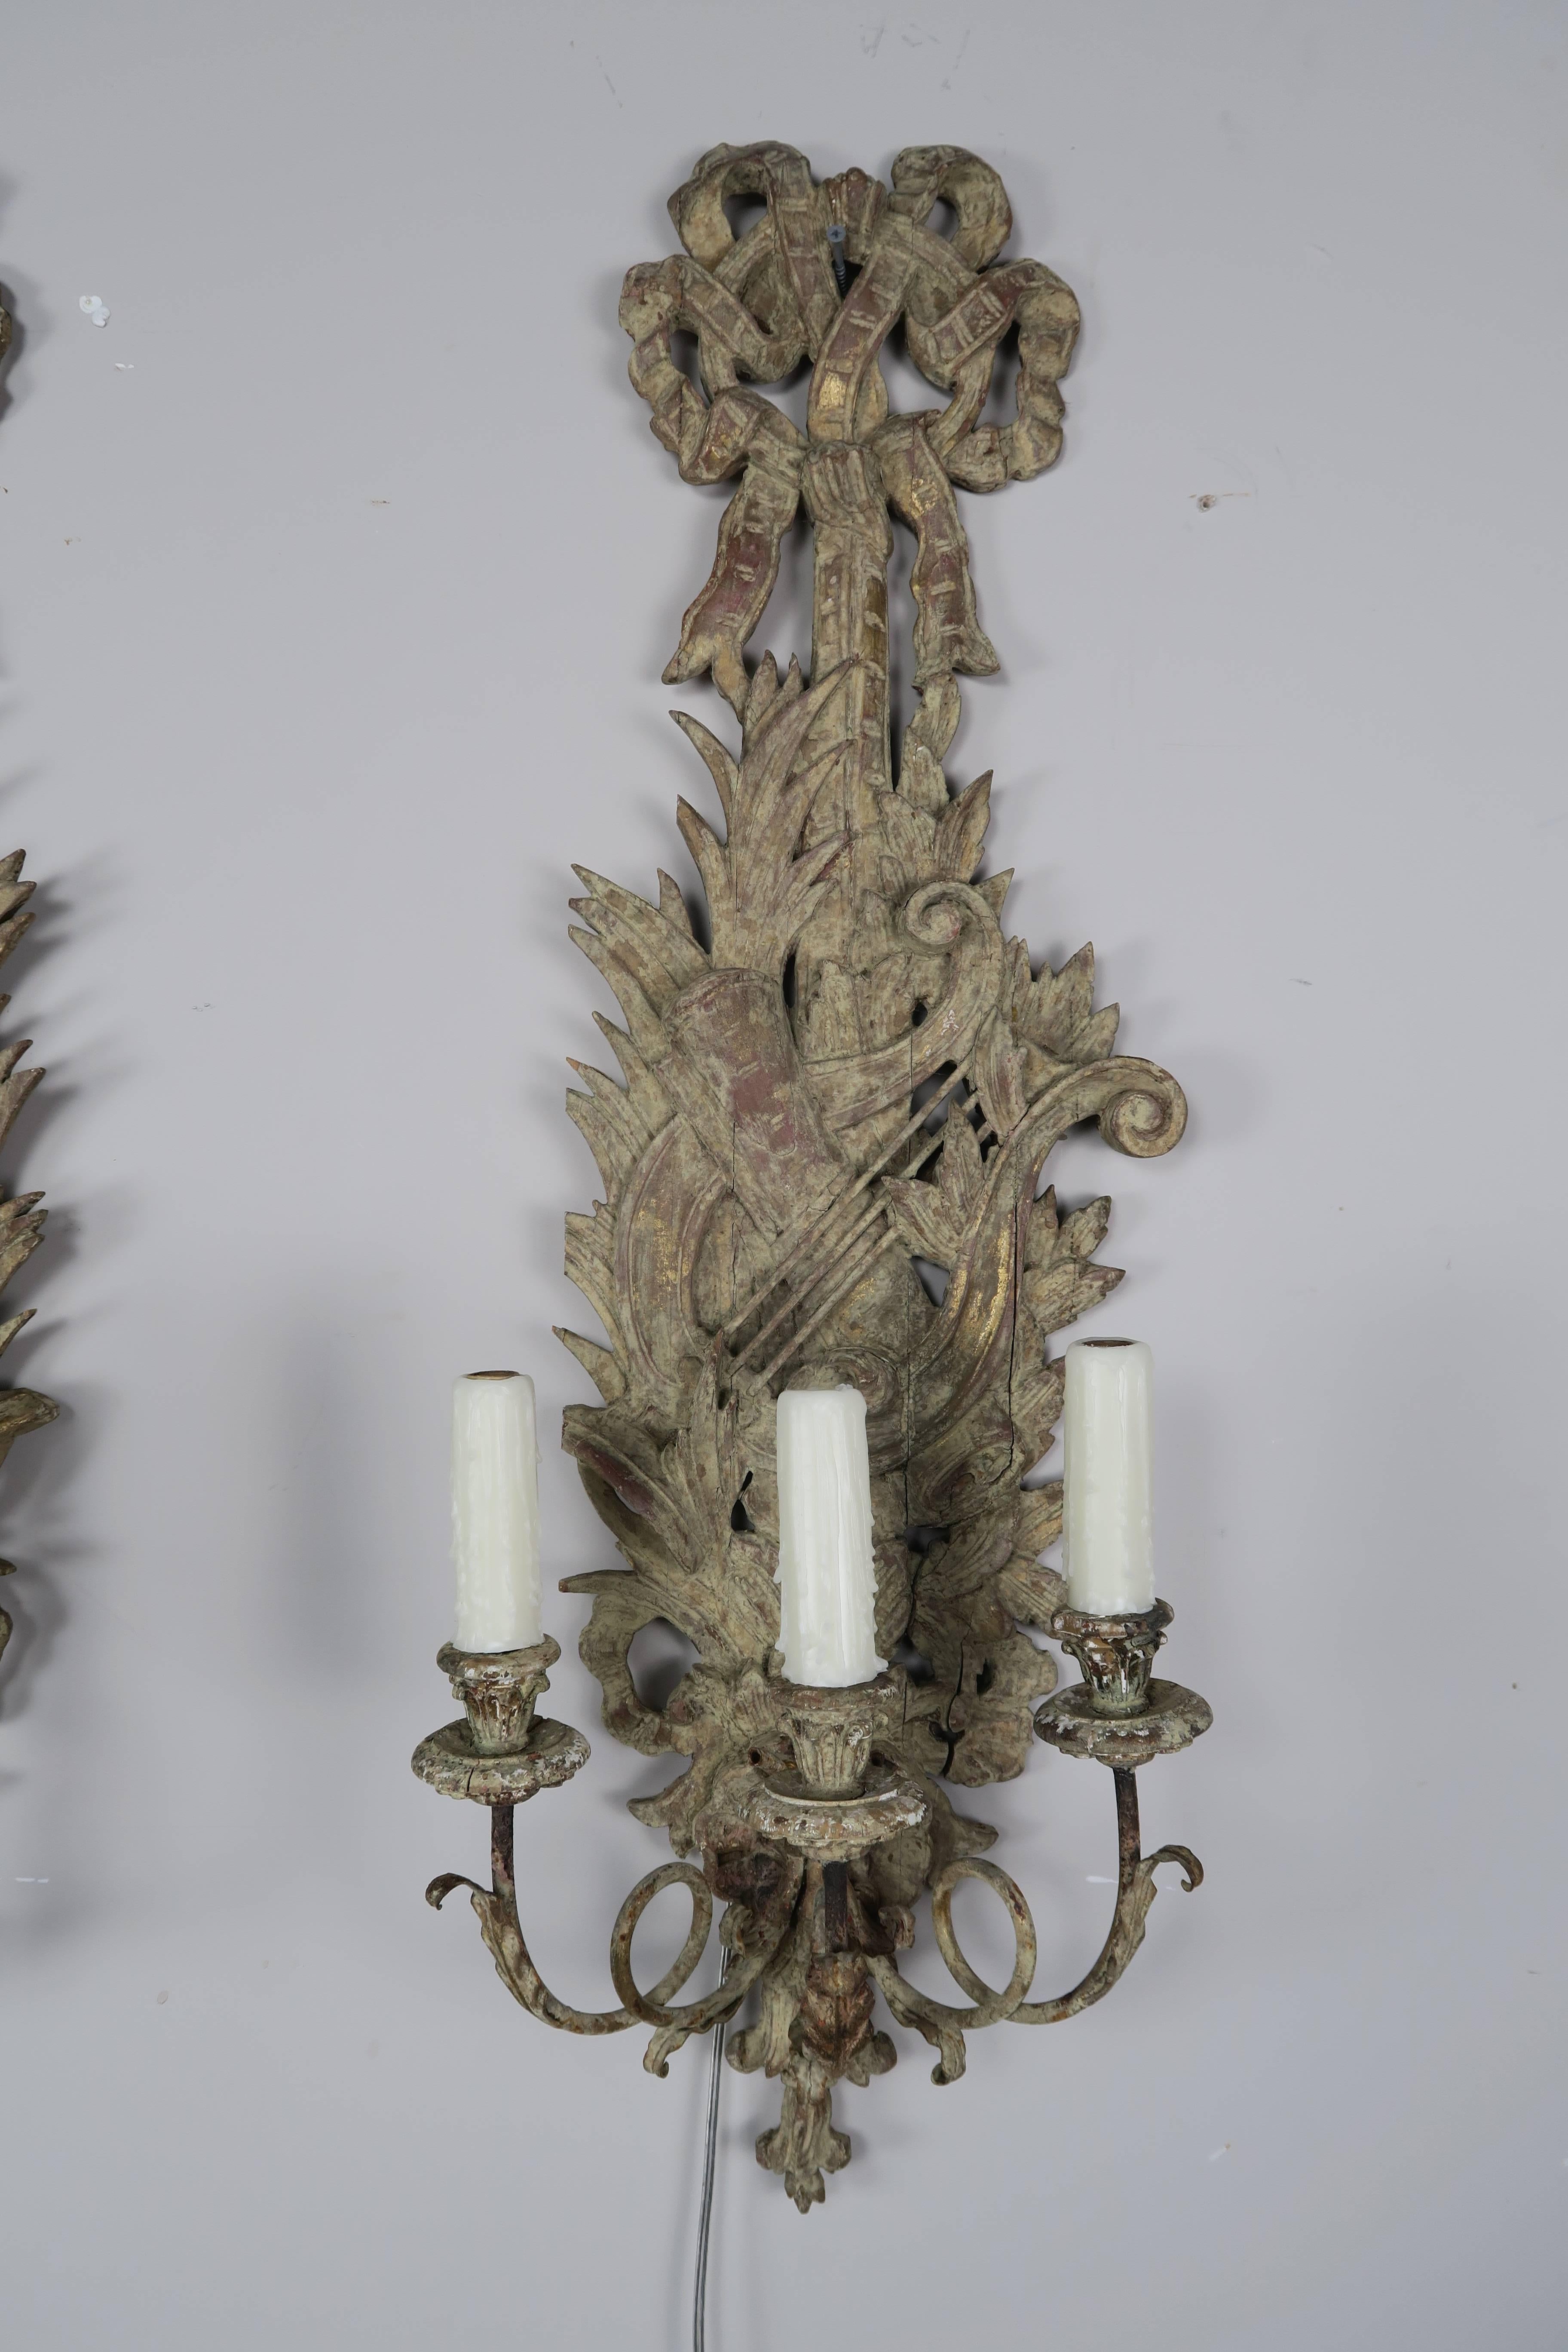 Pair of French three-light carved wood sconces with musical instruments, ribbon and laurel leaves throughout. Remnants of gold leaf throughout. Newly rewired with drip wax candle covers.